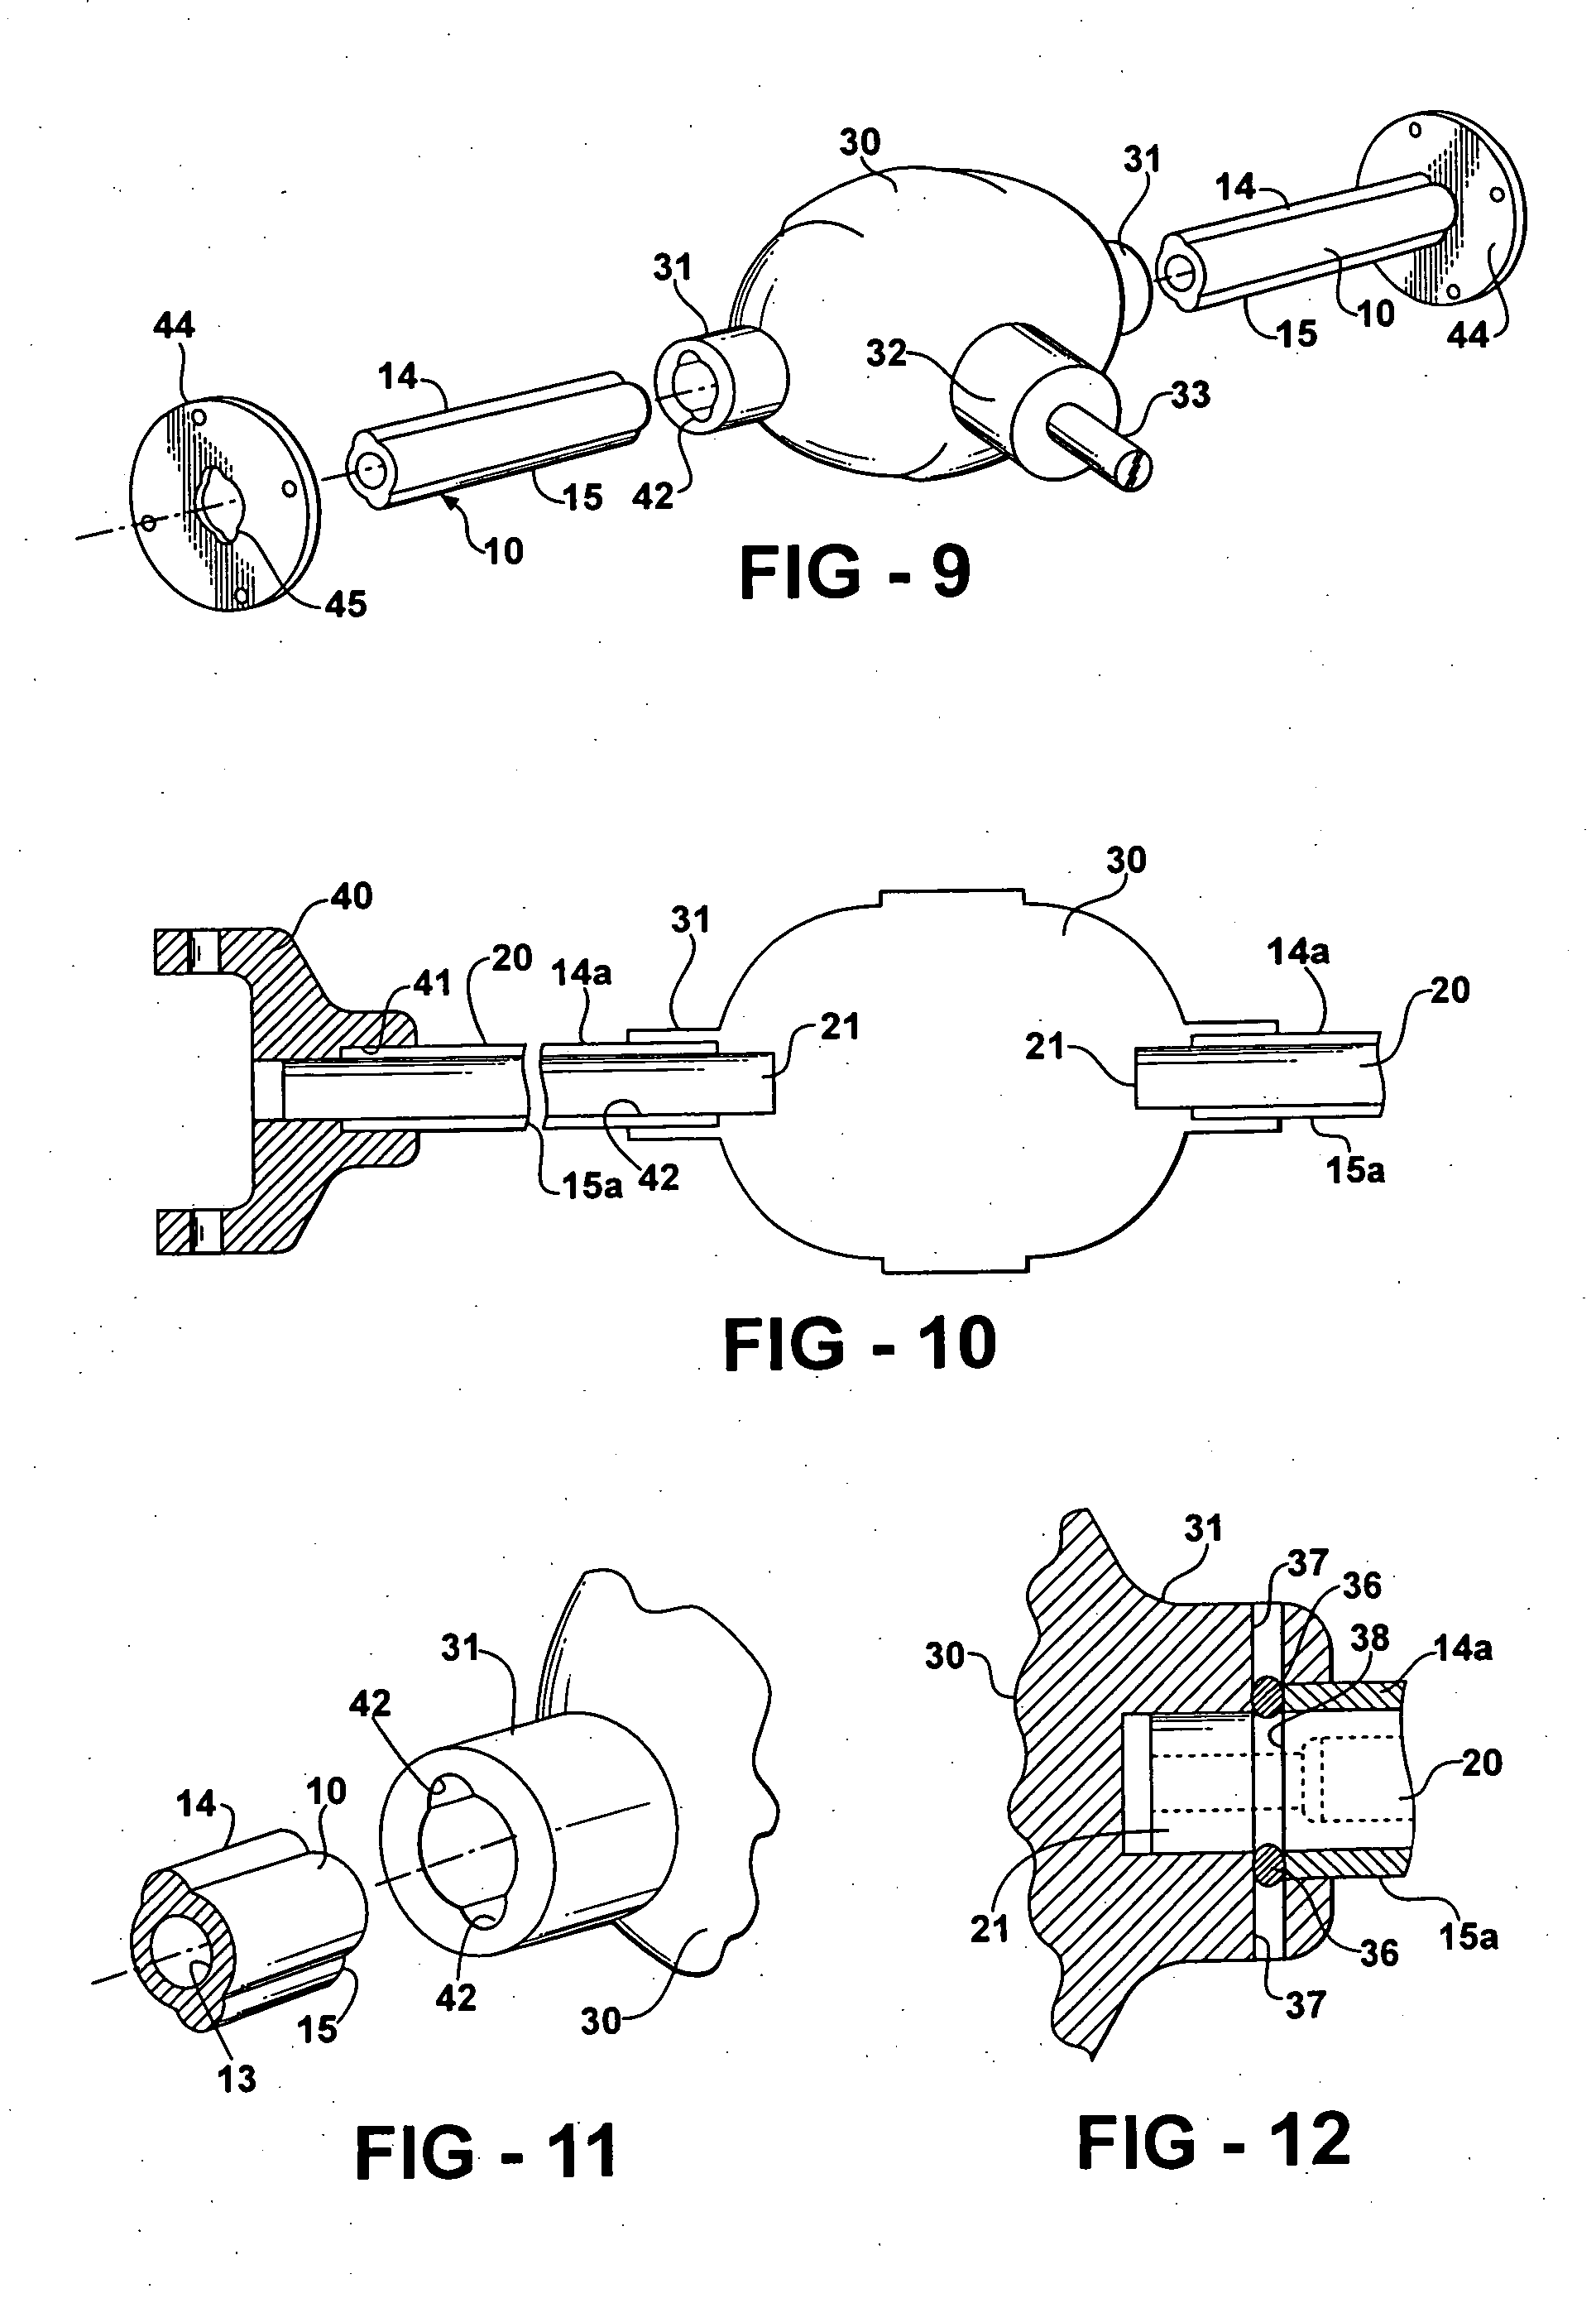 Light weight, stiffened, twist resistant, extruded vehicle axle